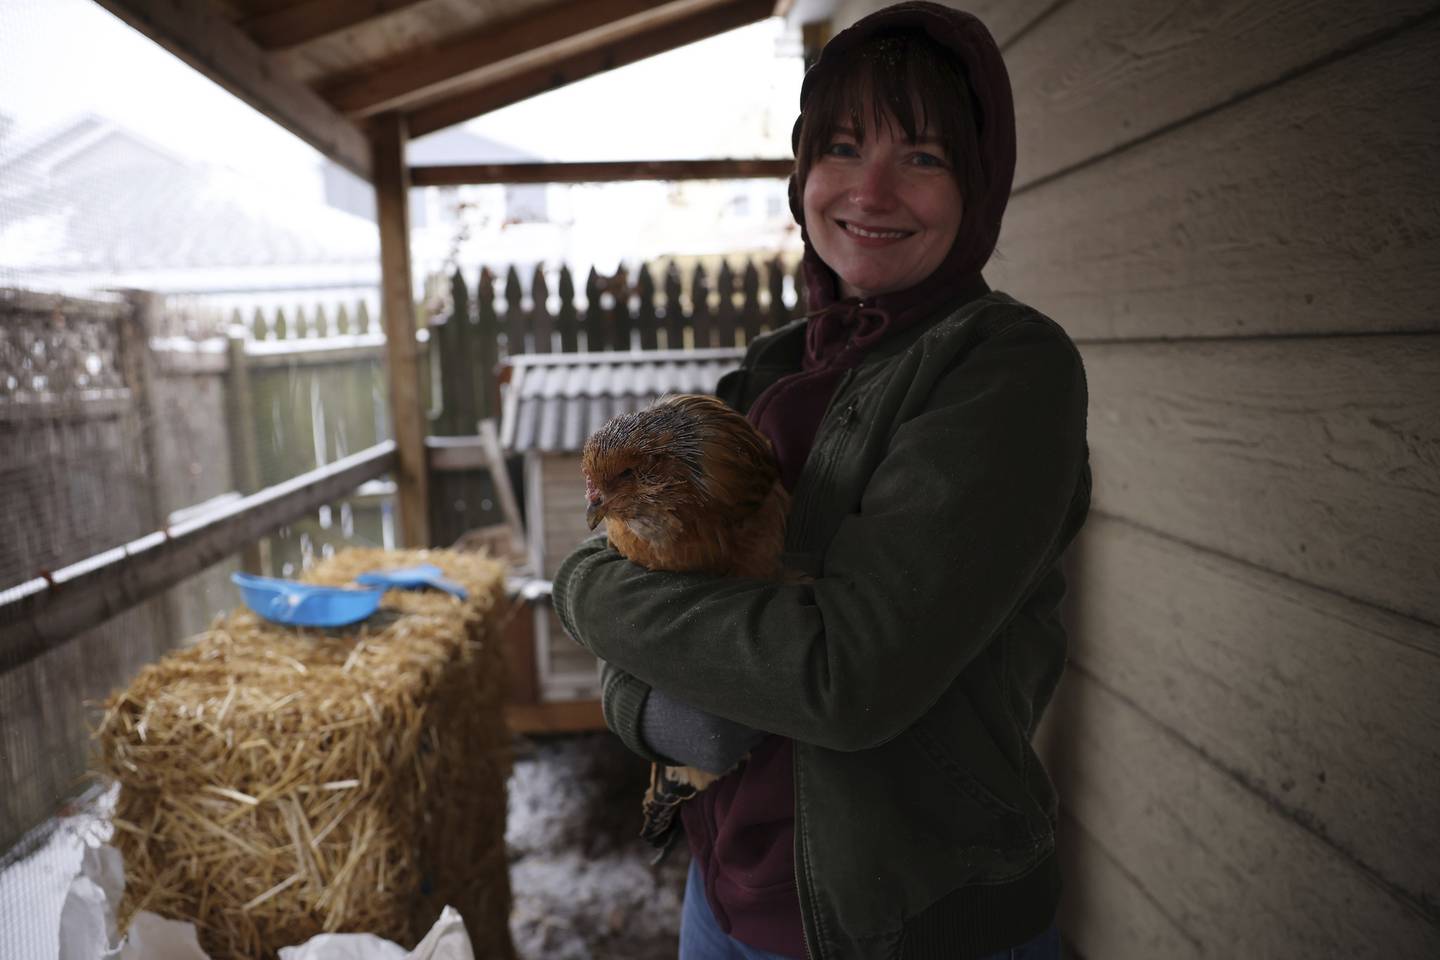 Taylor O'Brien holds one of her chickens during the winter storm at her home in Chicago on Dec. 22, 2022. Her family is putting bales of hay in the run where the coop is located to block the wind.